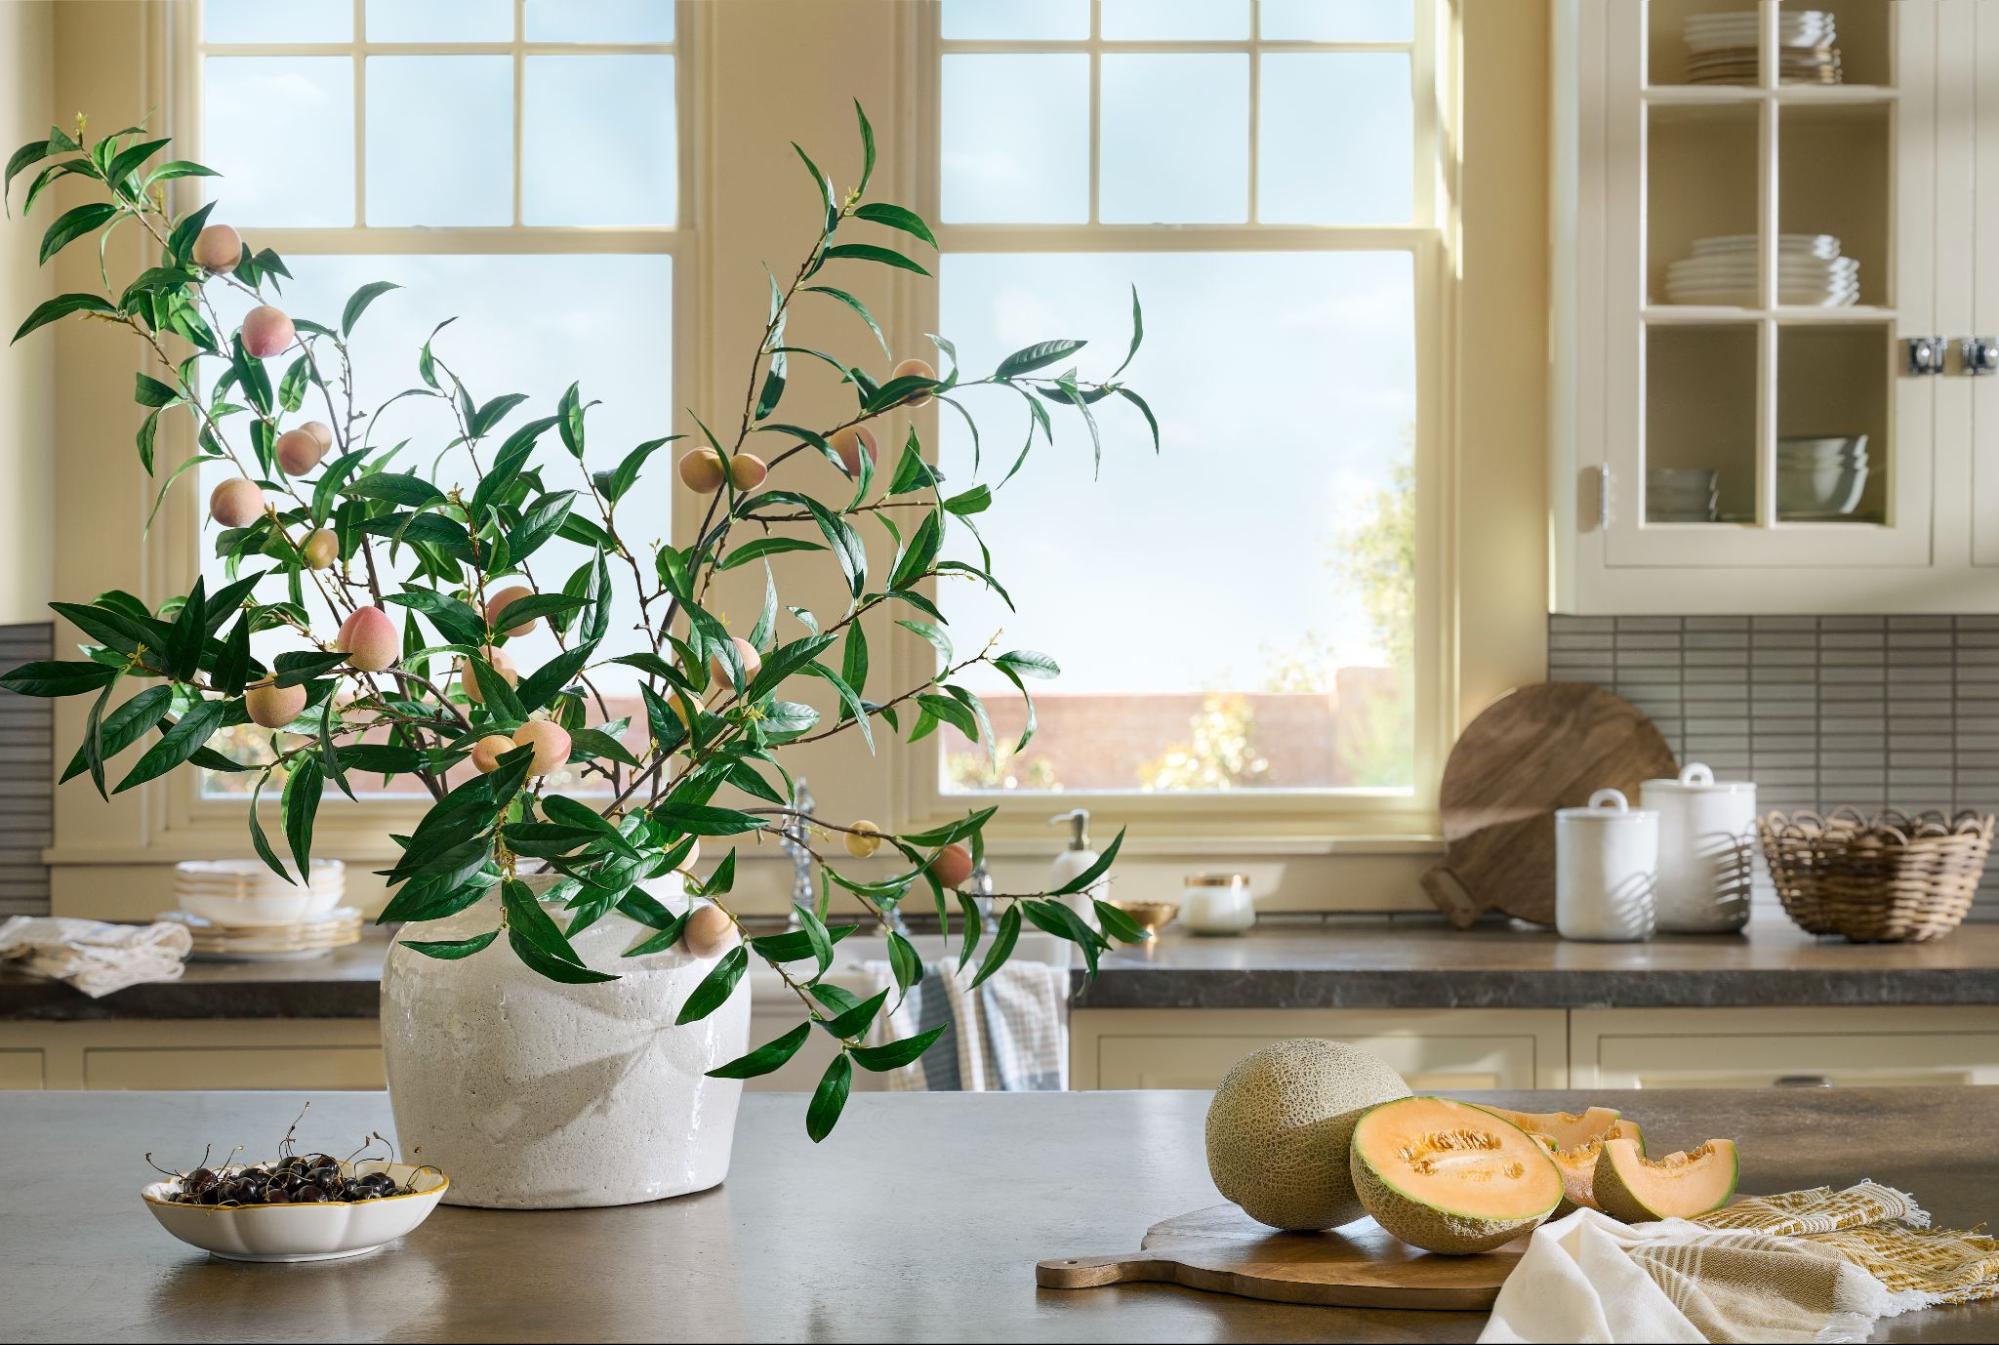 Faux greenery dotted with orange peaches sits in a white vase on a kitchen counter.